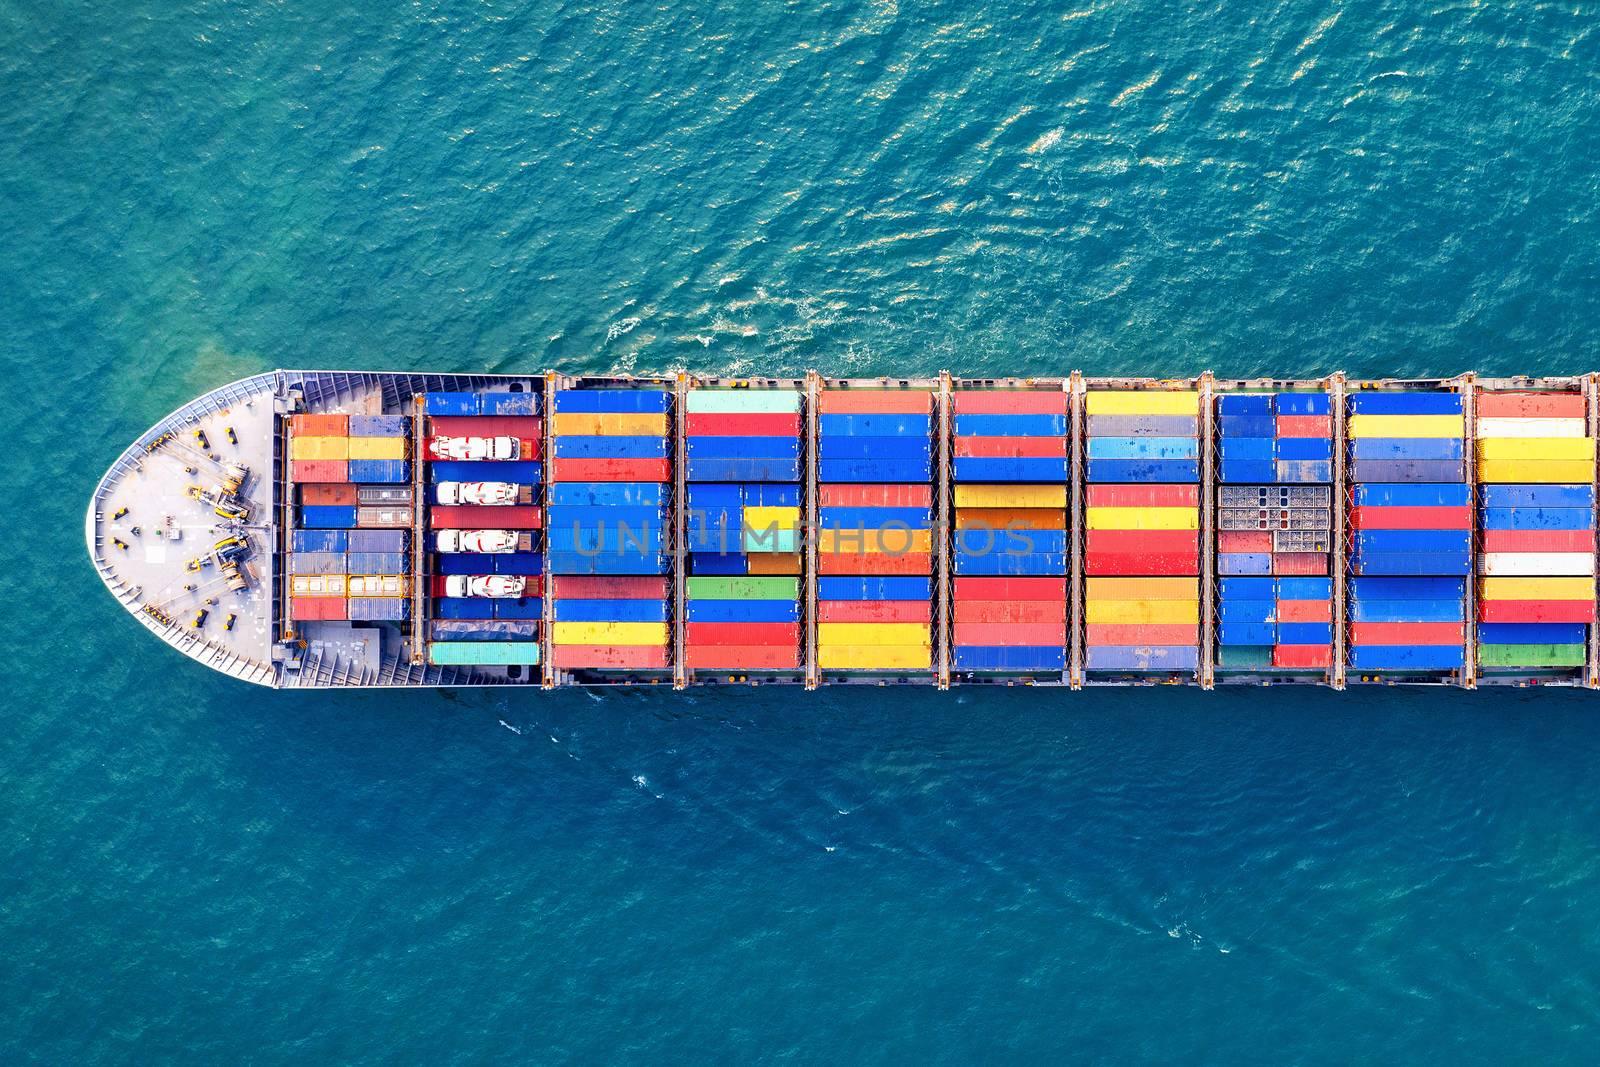 Aerial view of container cargo ship in sea. by gutarphotoghaphy